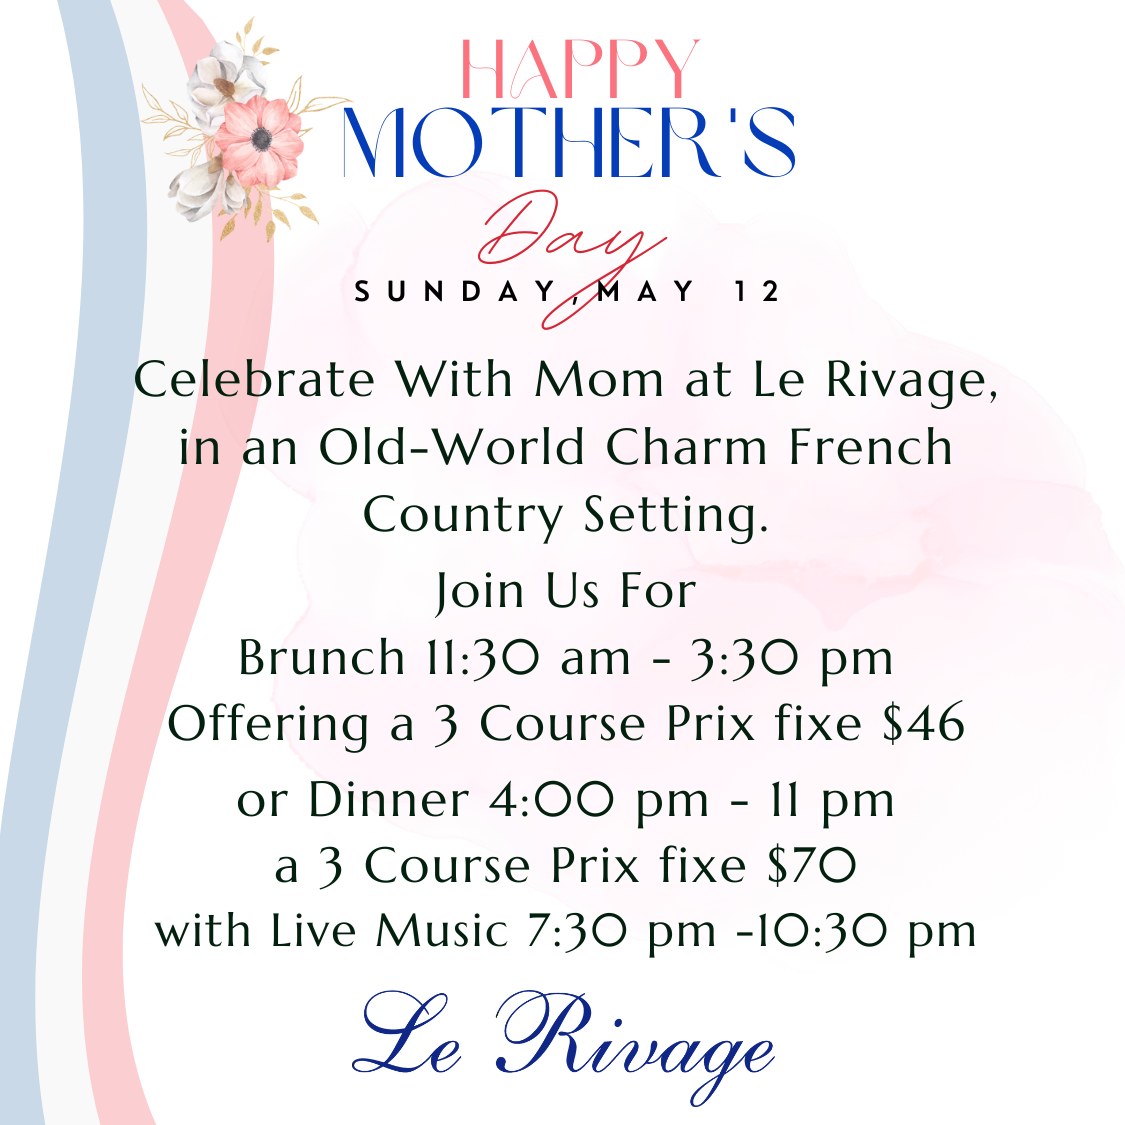 Celebrate with Mom at Le Rivage in an Old-World Charm French Country Setting. Join us for Brunch or Dinner with live music.